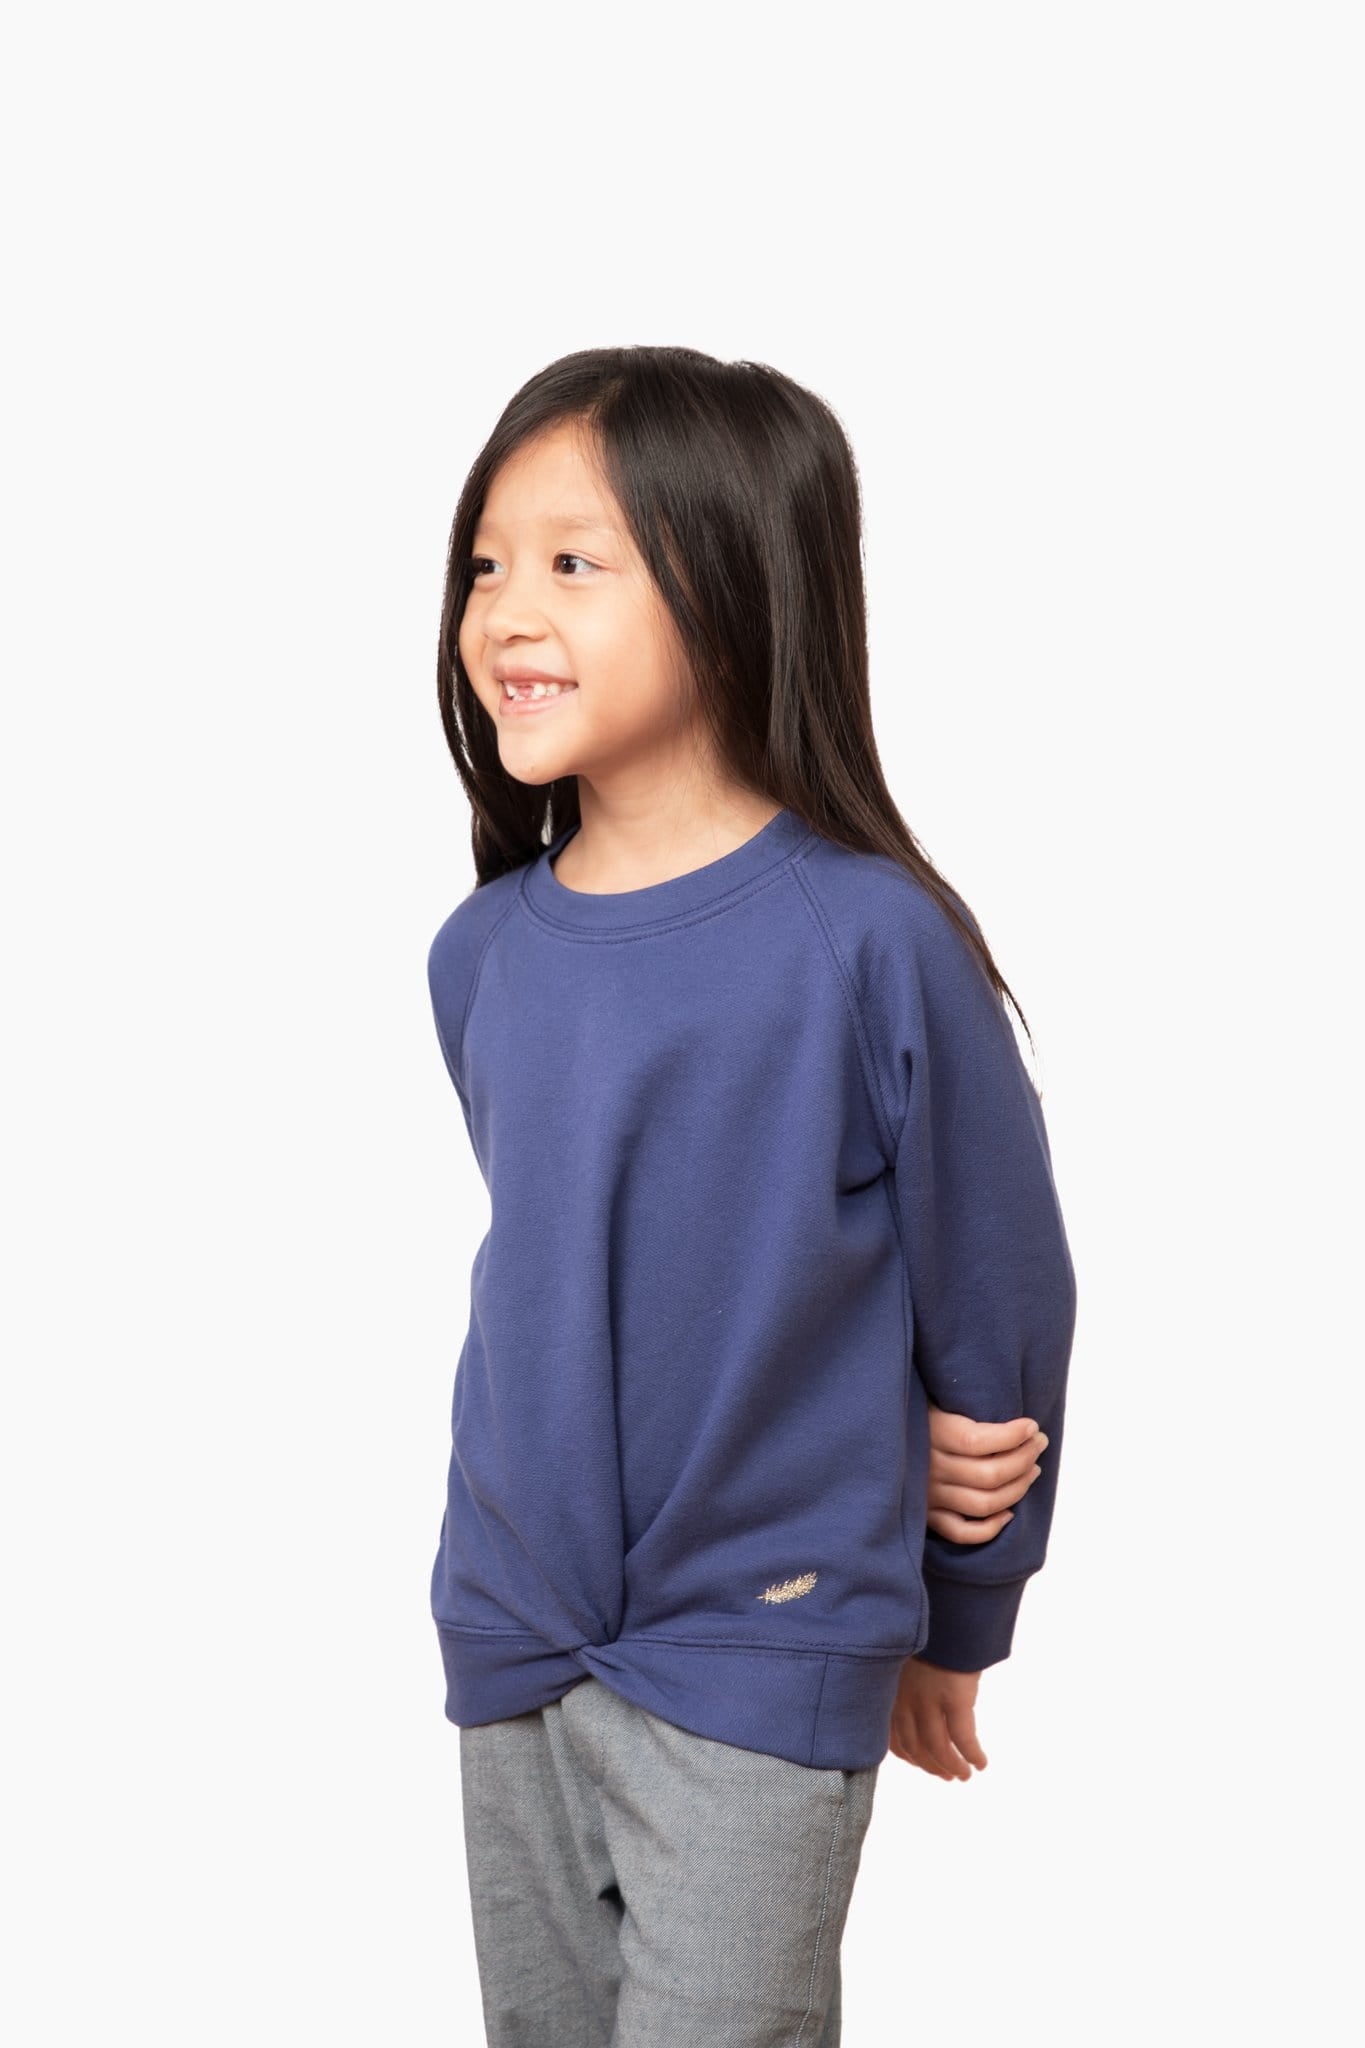 Kids sweatshirts. 100% Organic cotton fleece, cut and sew in NYC. Deep blue color. Golden feather embroidery as a nice and stylish detail. 